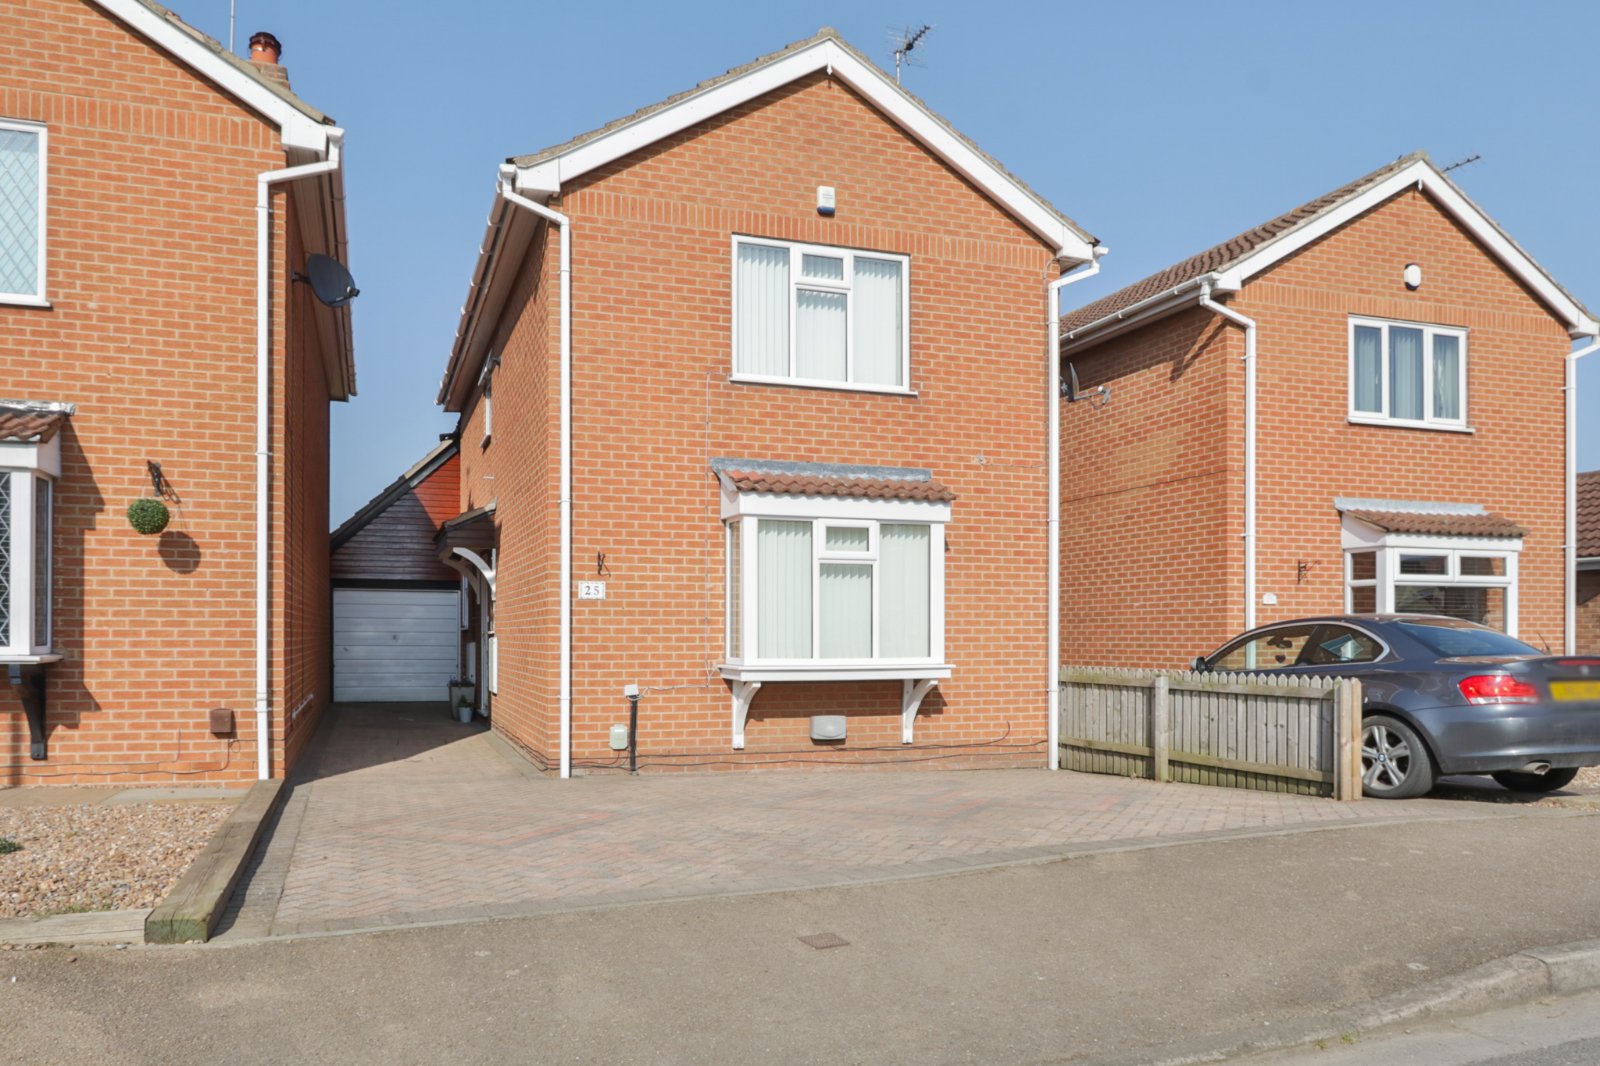 3 bed house for sale in Acklam Road, Hedon  - Property Image 1